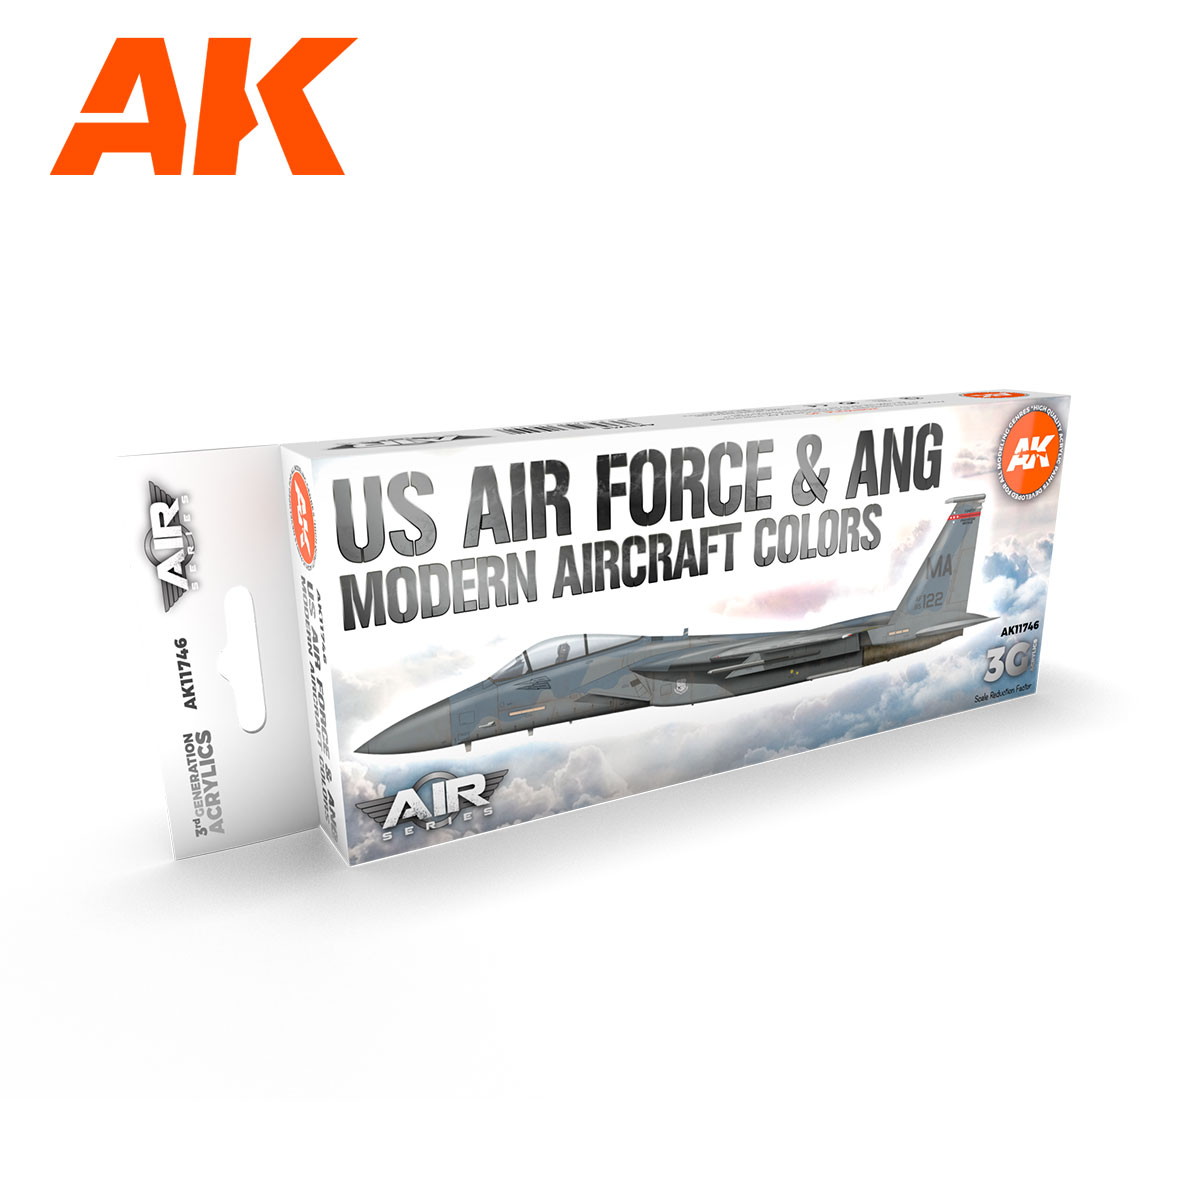 Buy AK Figure painting handle online for22,95€